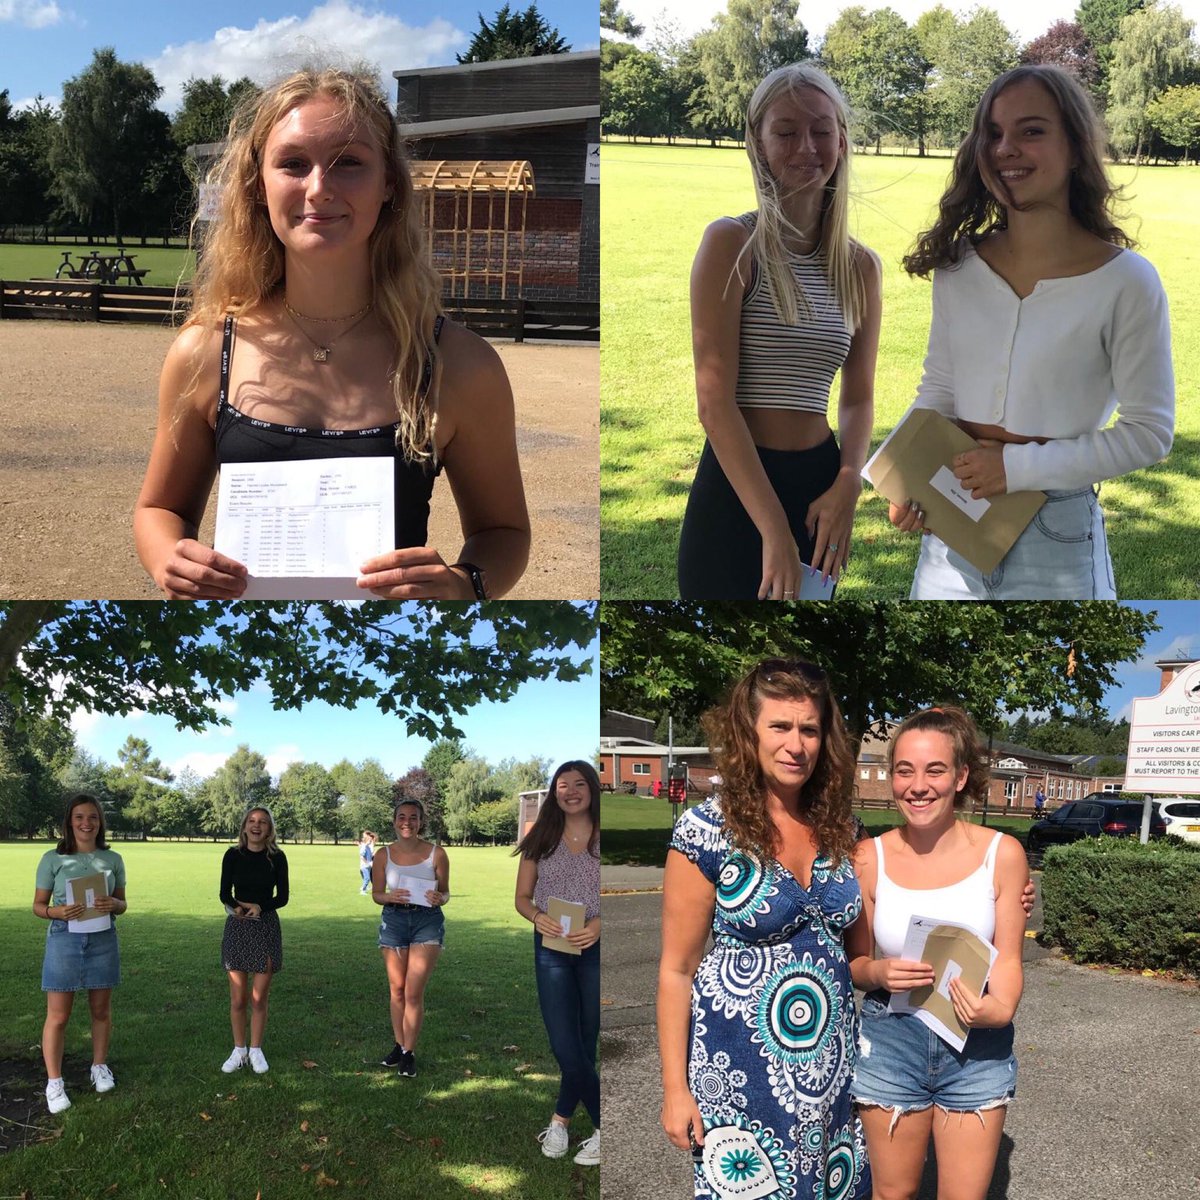 Congratulations to class of 2020 on their amazing results. Well done to all #superproud #gcseresults2020 #selectionofphotosfromtoday